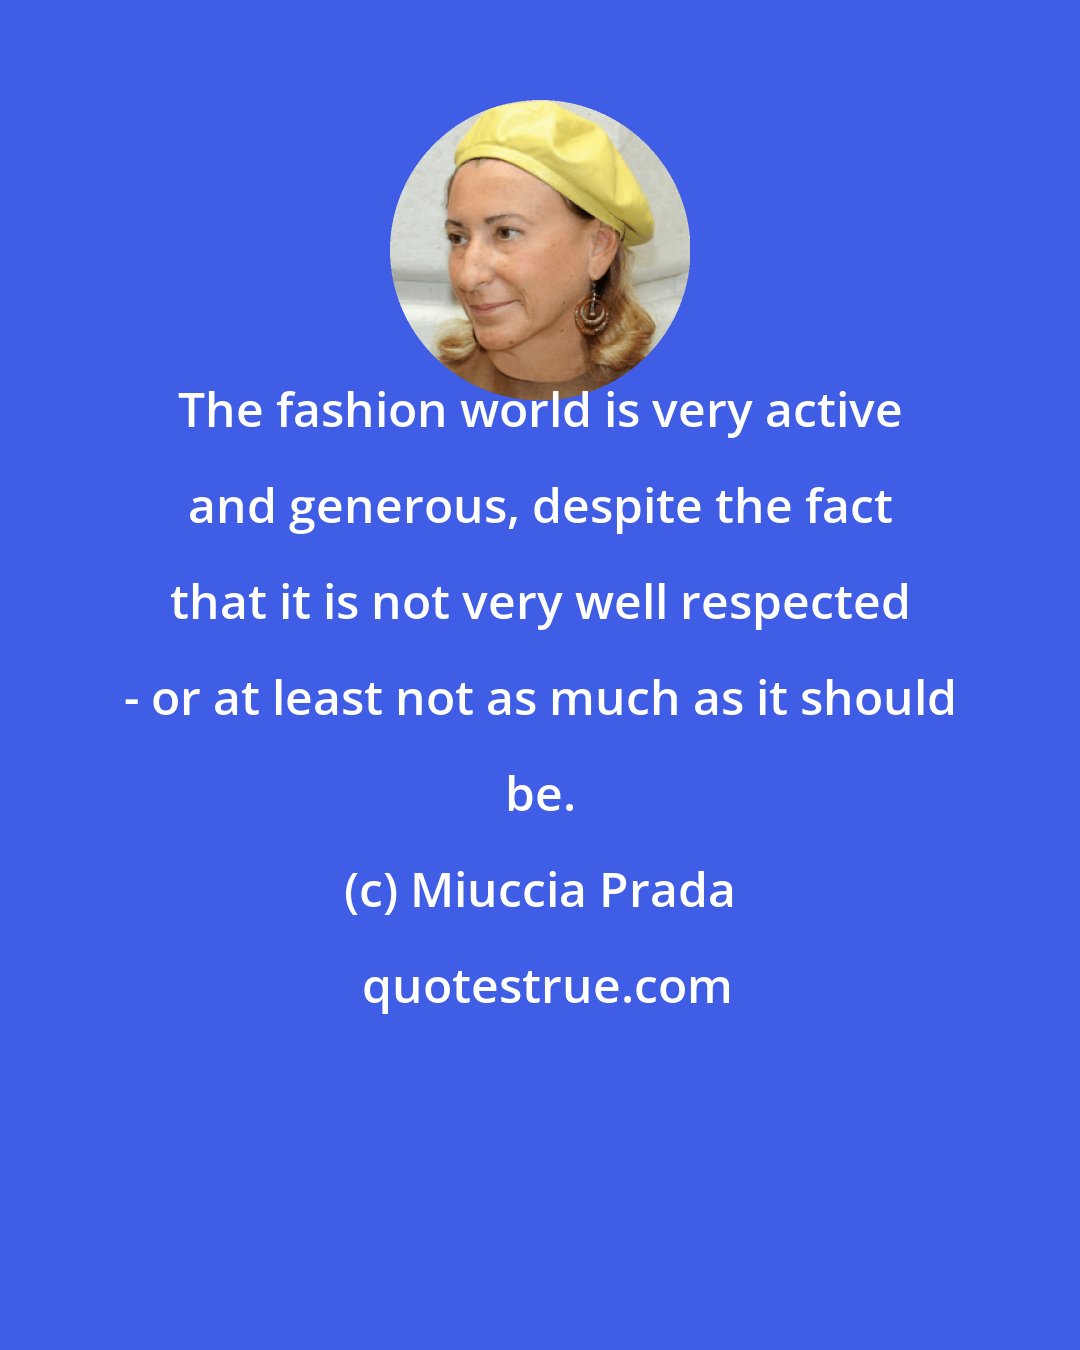 Miuccia Prada: The fashion world is very active and generous, despite the fact that it is not very well respected - or at least not as much as it should be.